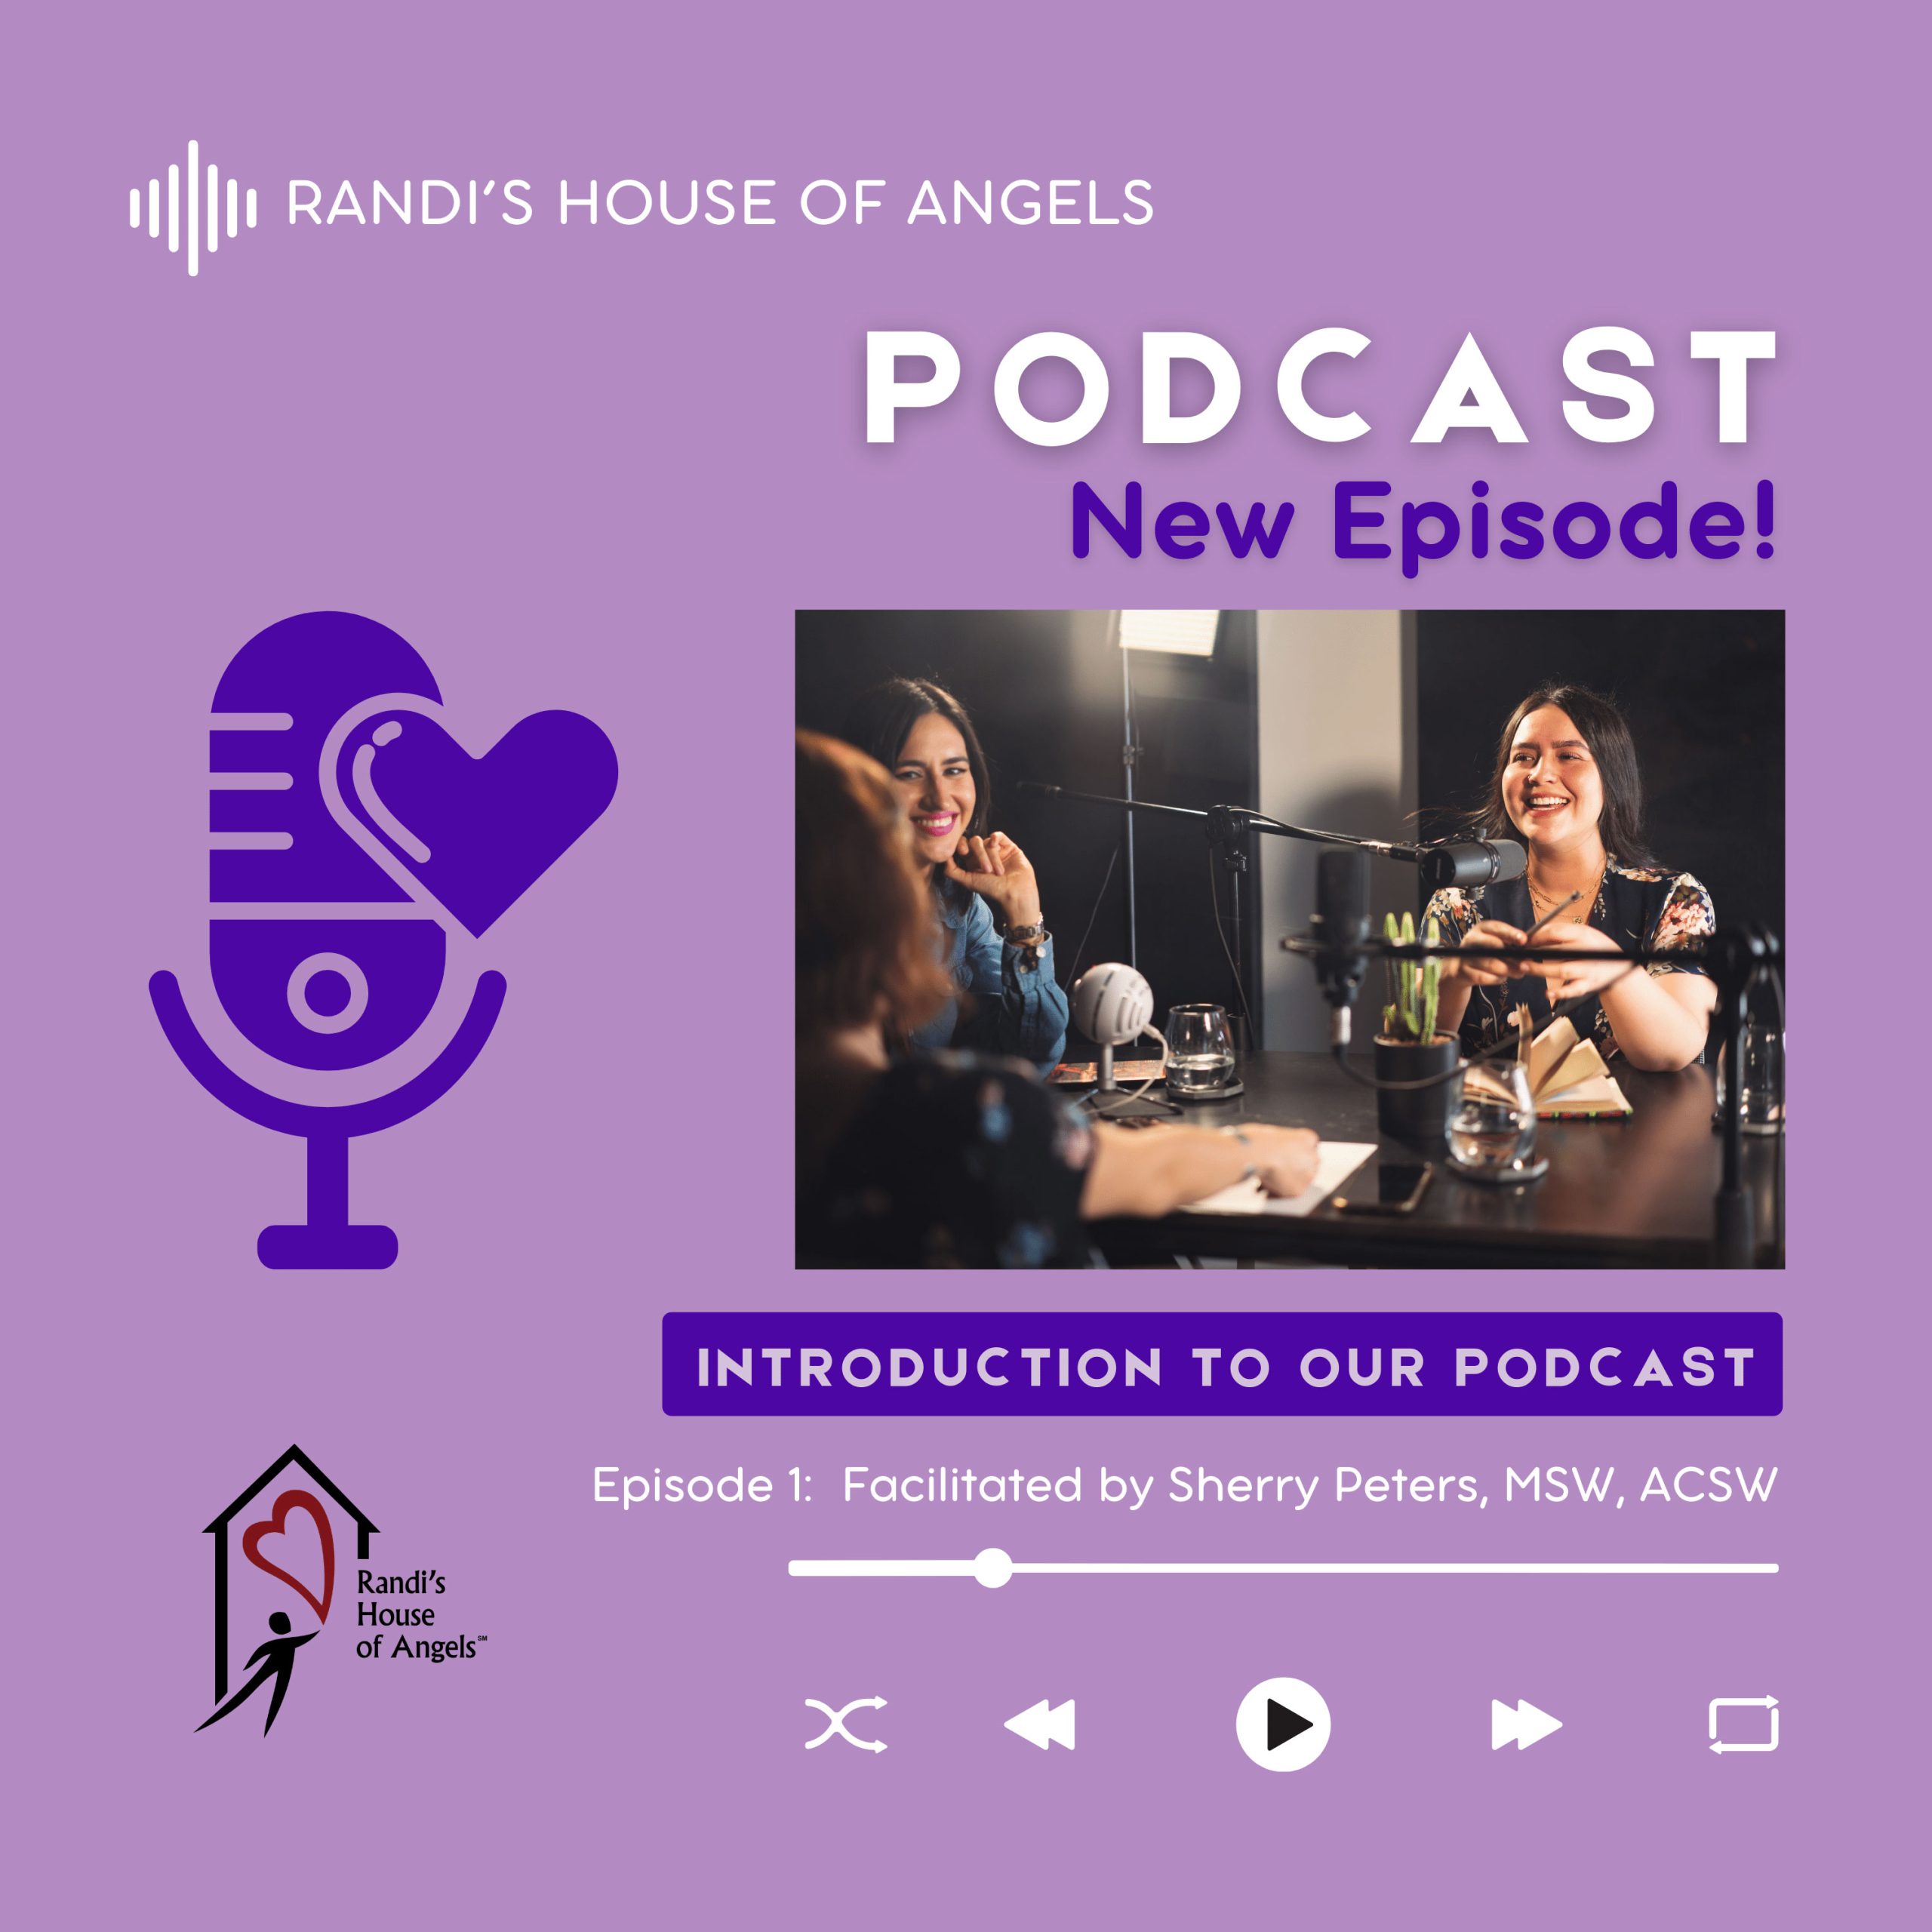 Randi's House of Angels Podcast Episode 1: Introduction to the Podcast